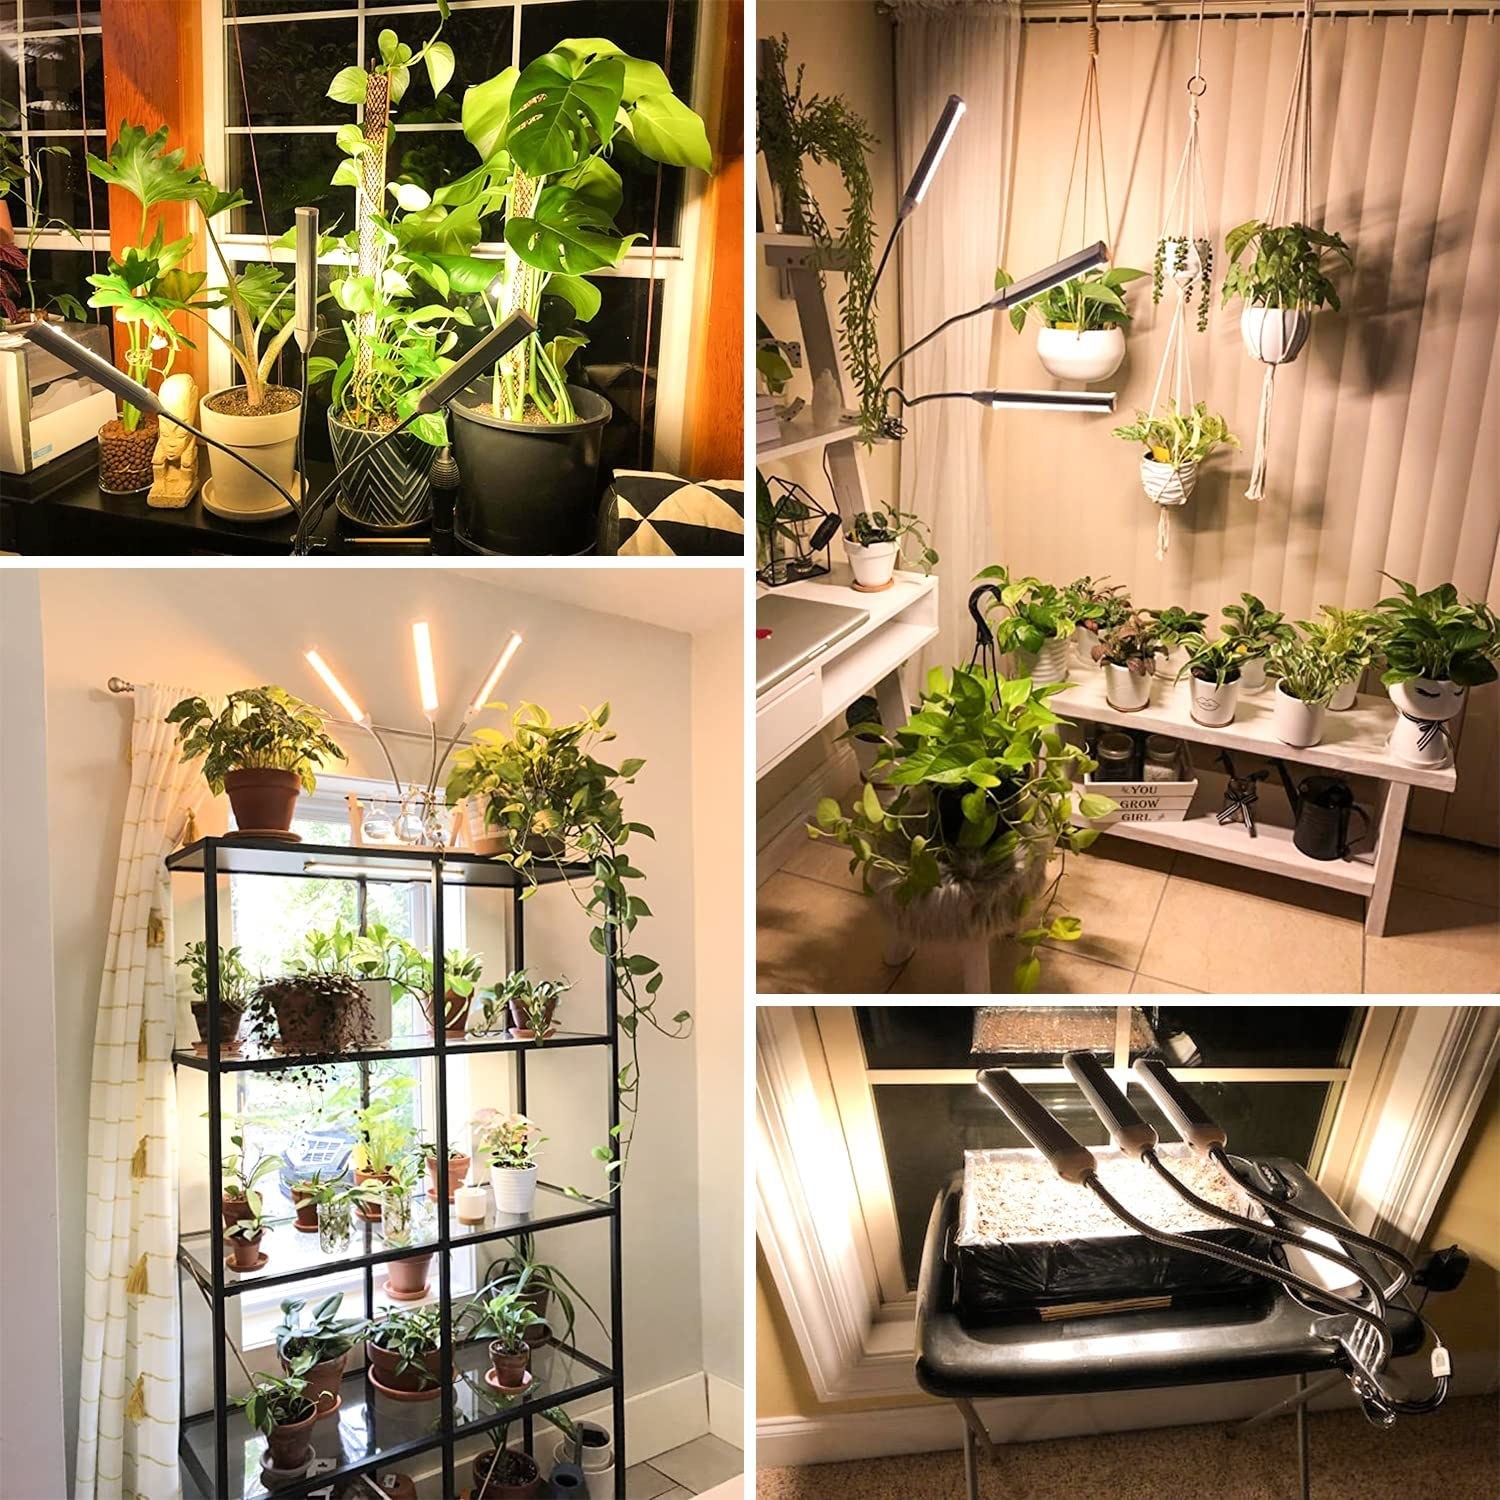 The grow light being used in various ways to spread light onto plants